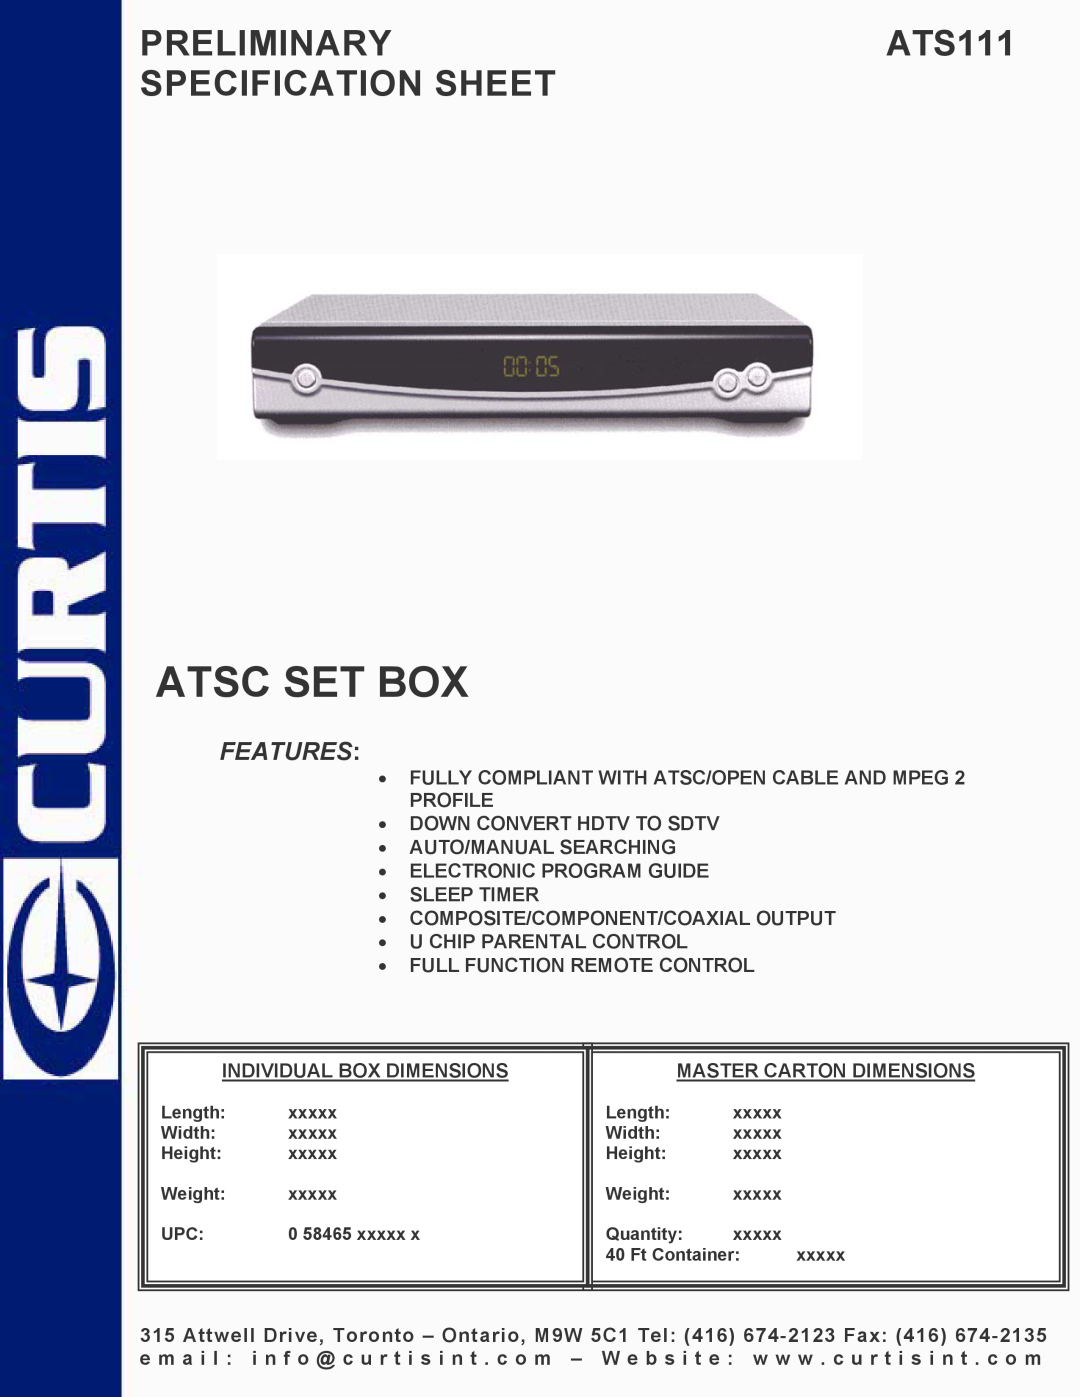 Curtis specifications Atsc Set Box, PRELIMINARYATS111 SPECIFICATION SHEET, Features 